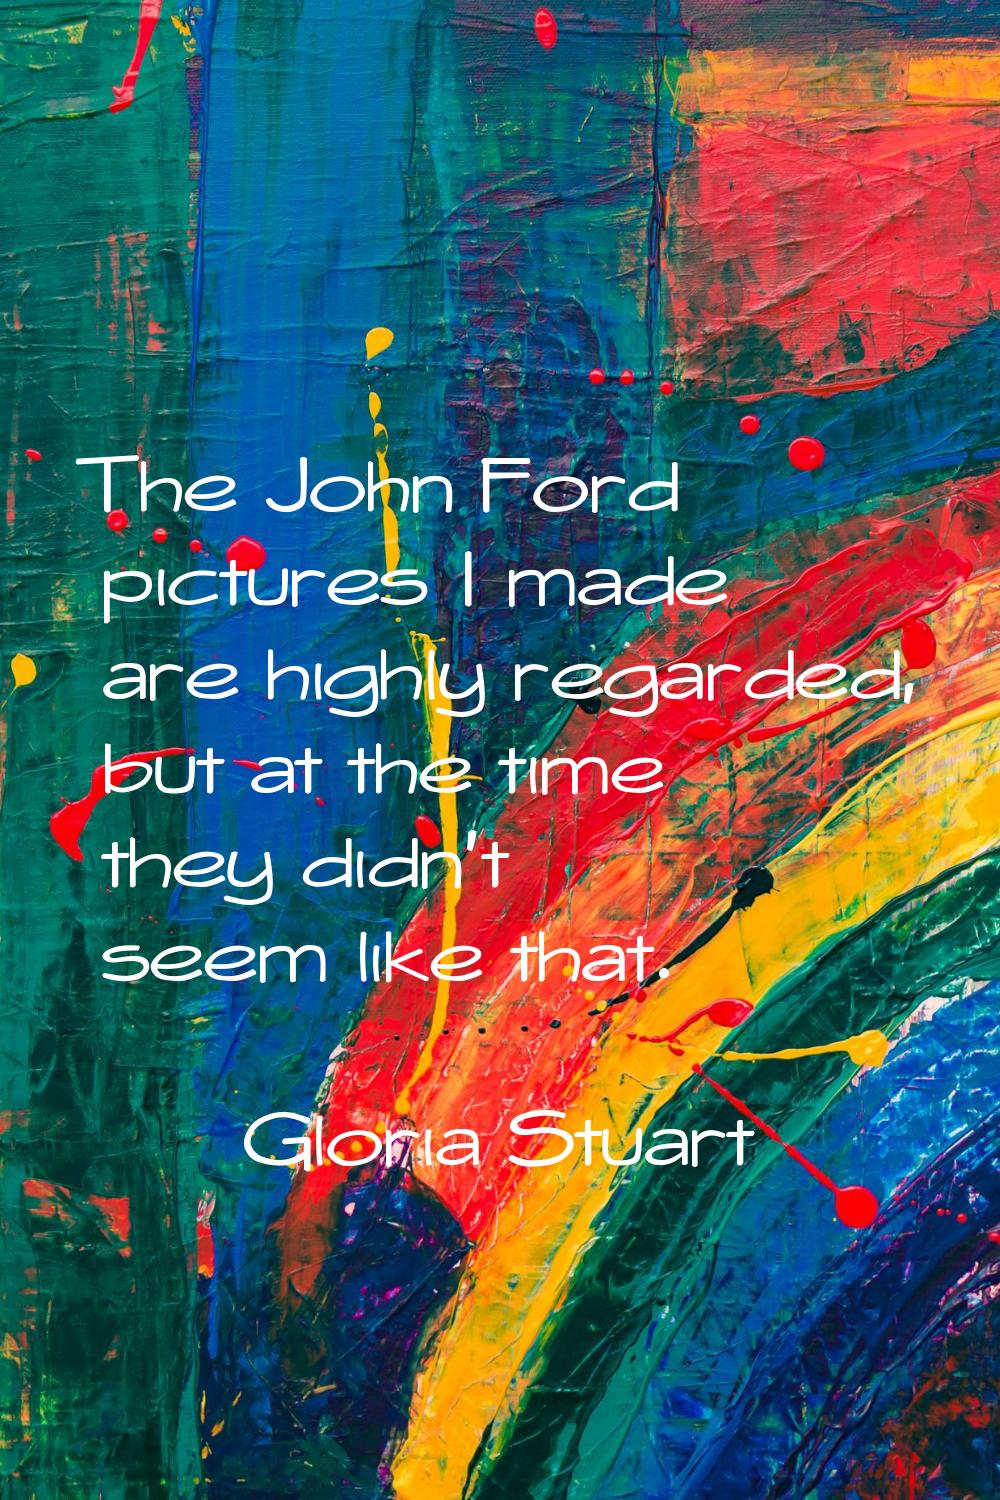 The John Ford pictures I made are highly regarded, but at the time they didn't seem like that.